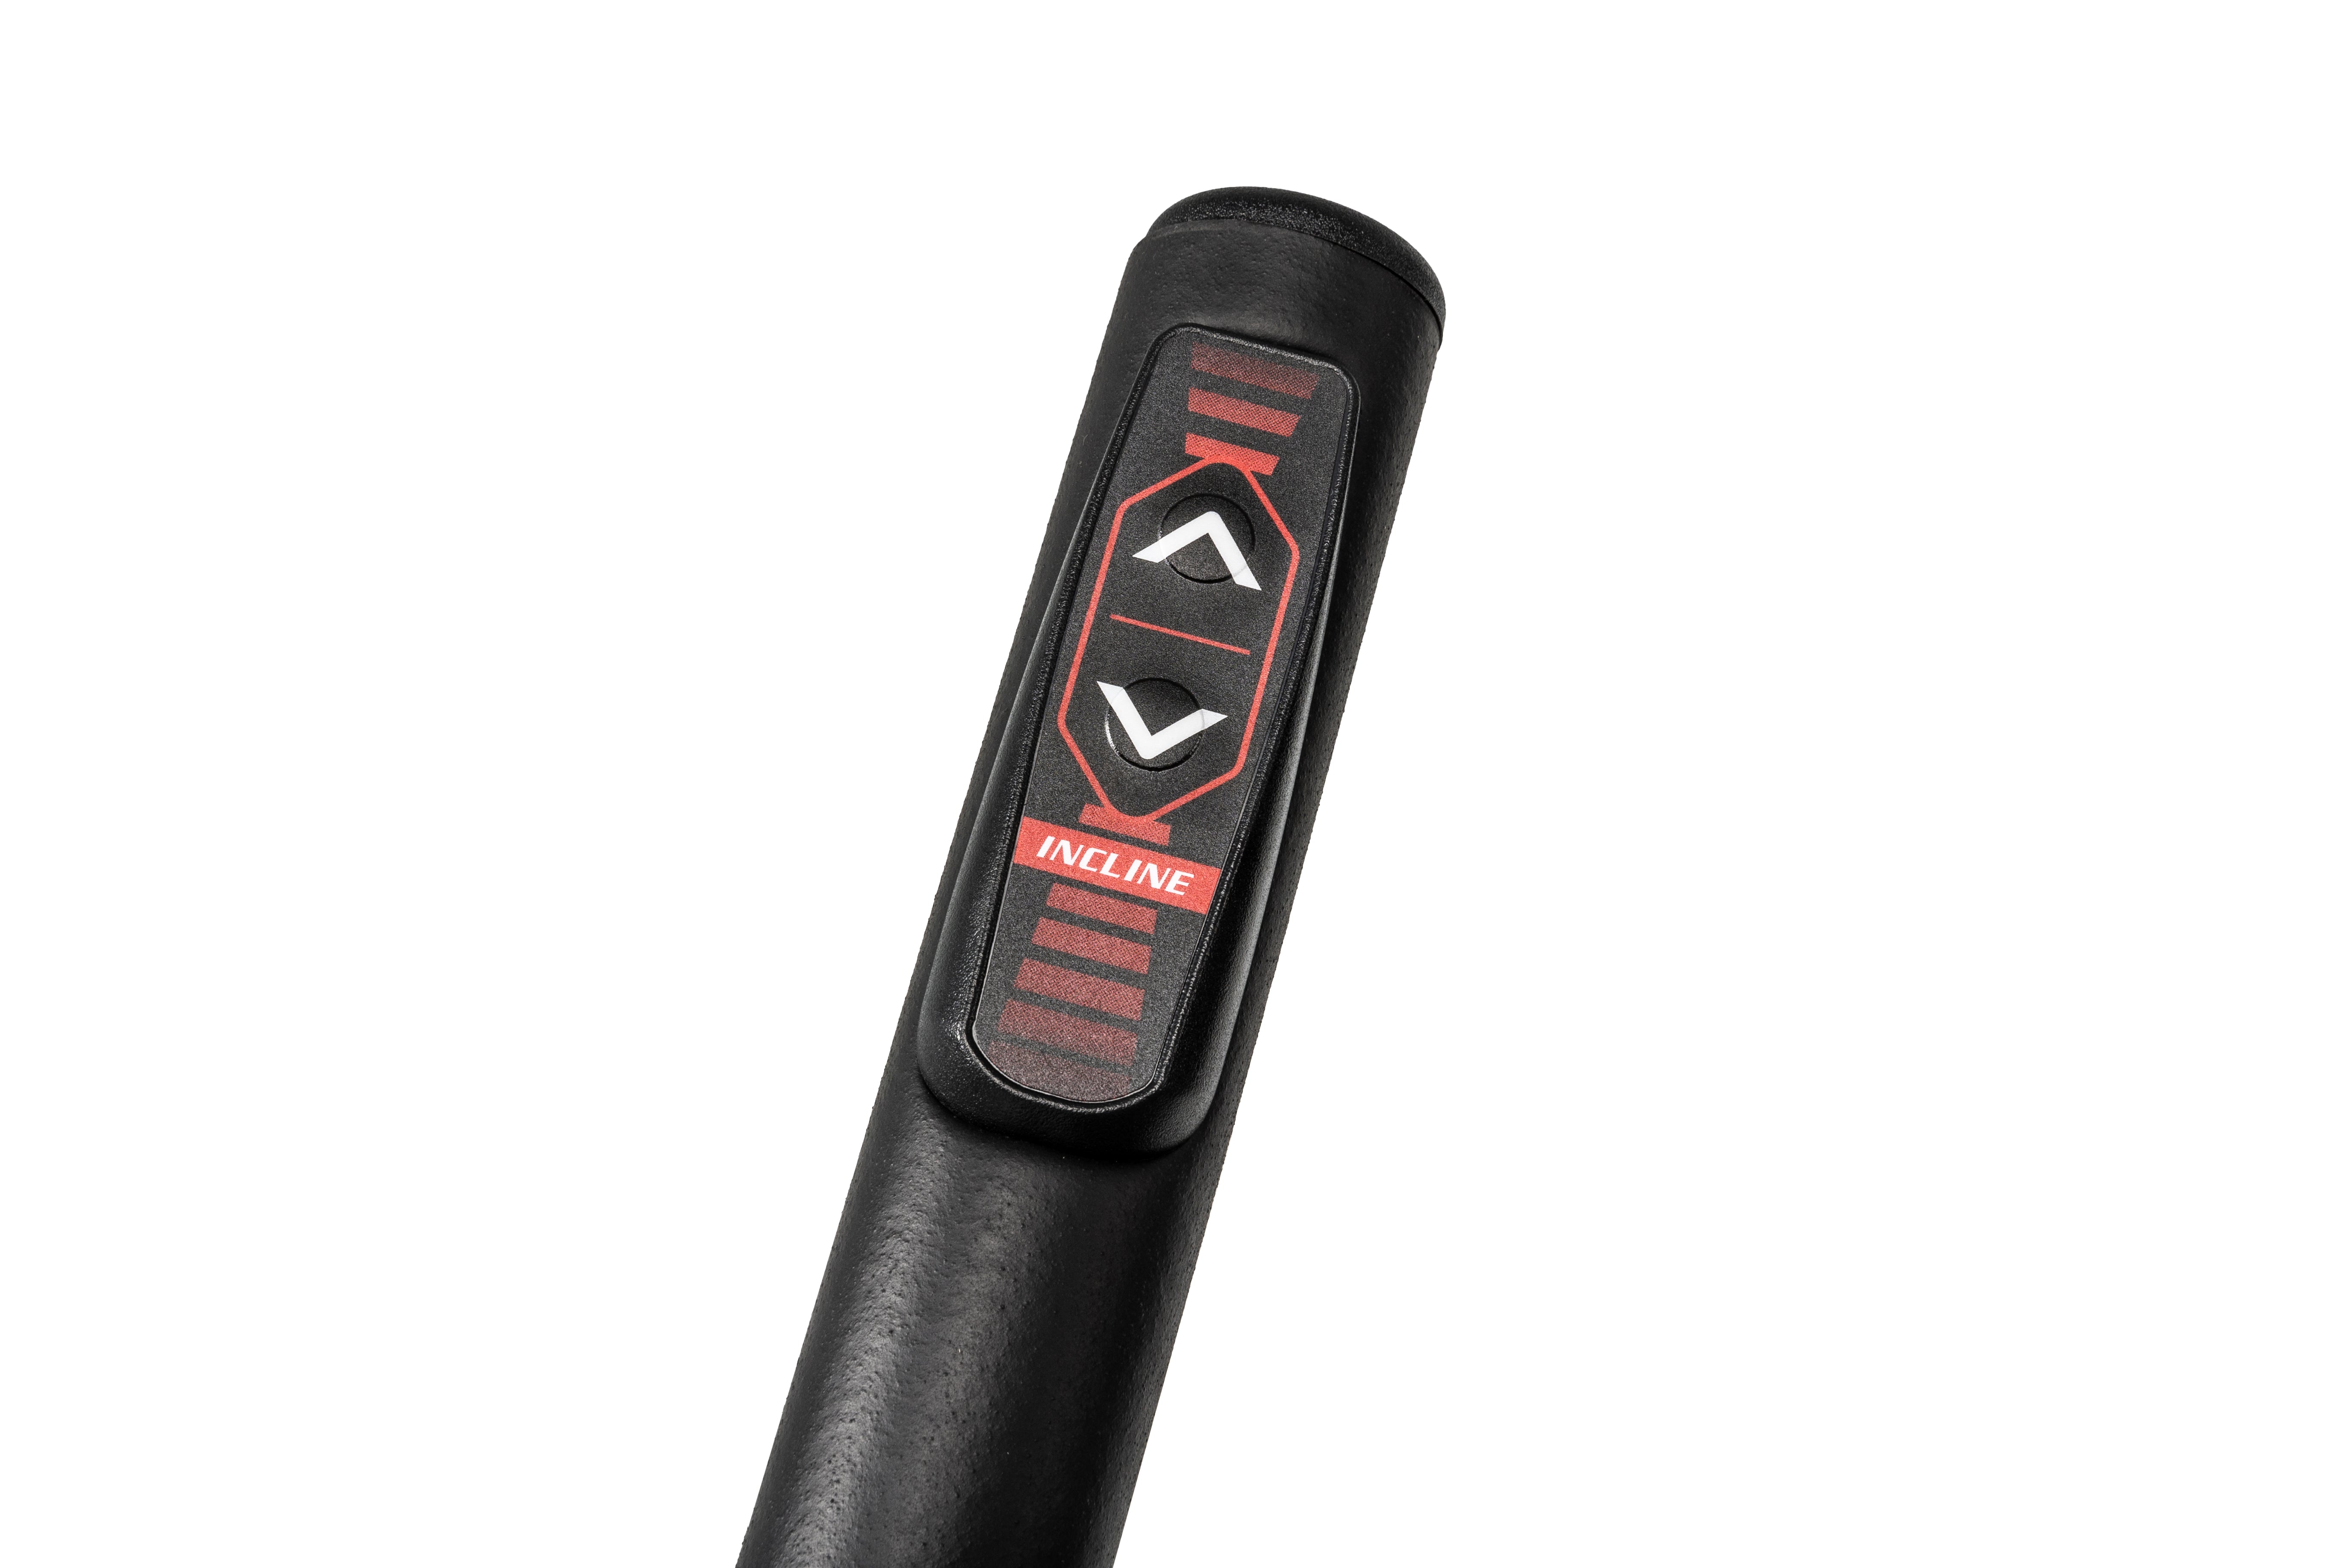 Close-up of the handlebar on the Sole E25 elliptical trainer, showcasing the red and black 'INCLINE' control buttons with up and down arrows, embedded on a sleek black surface.